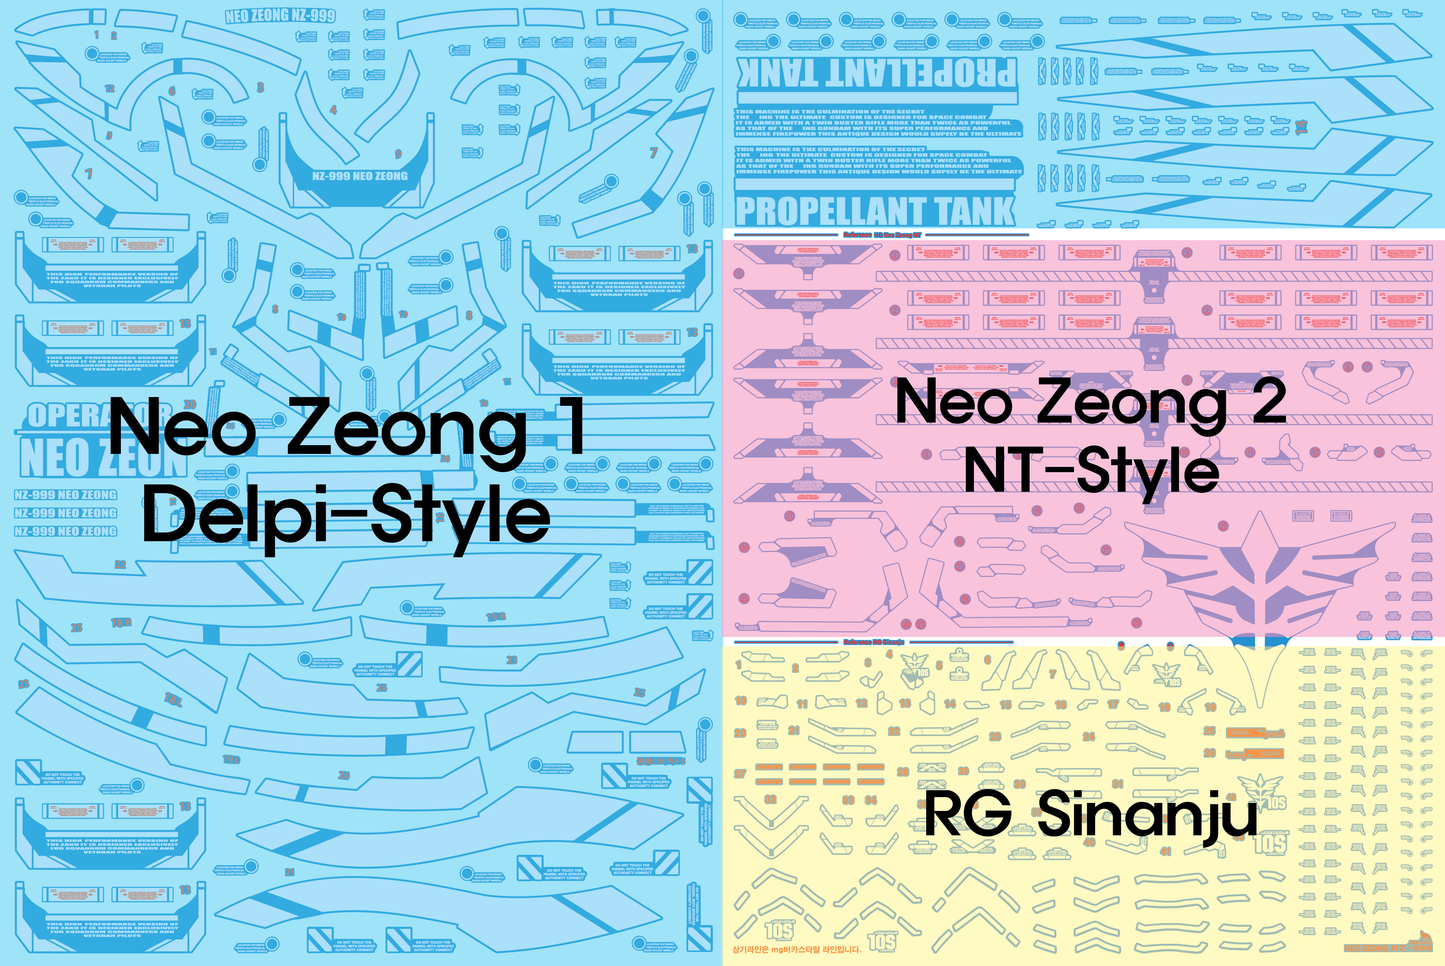 Delpi - HG NEO ZEONG WATER DECAL - Select Normal or Luminous